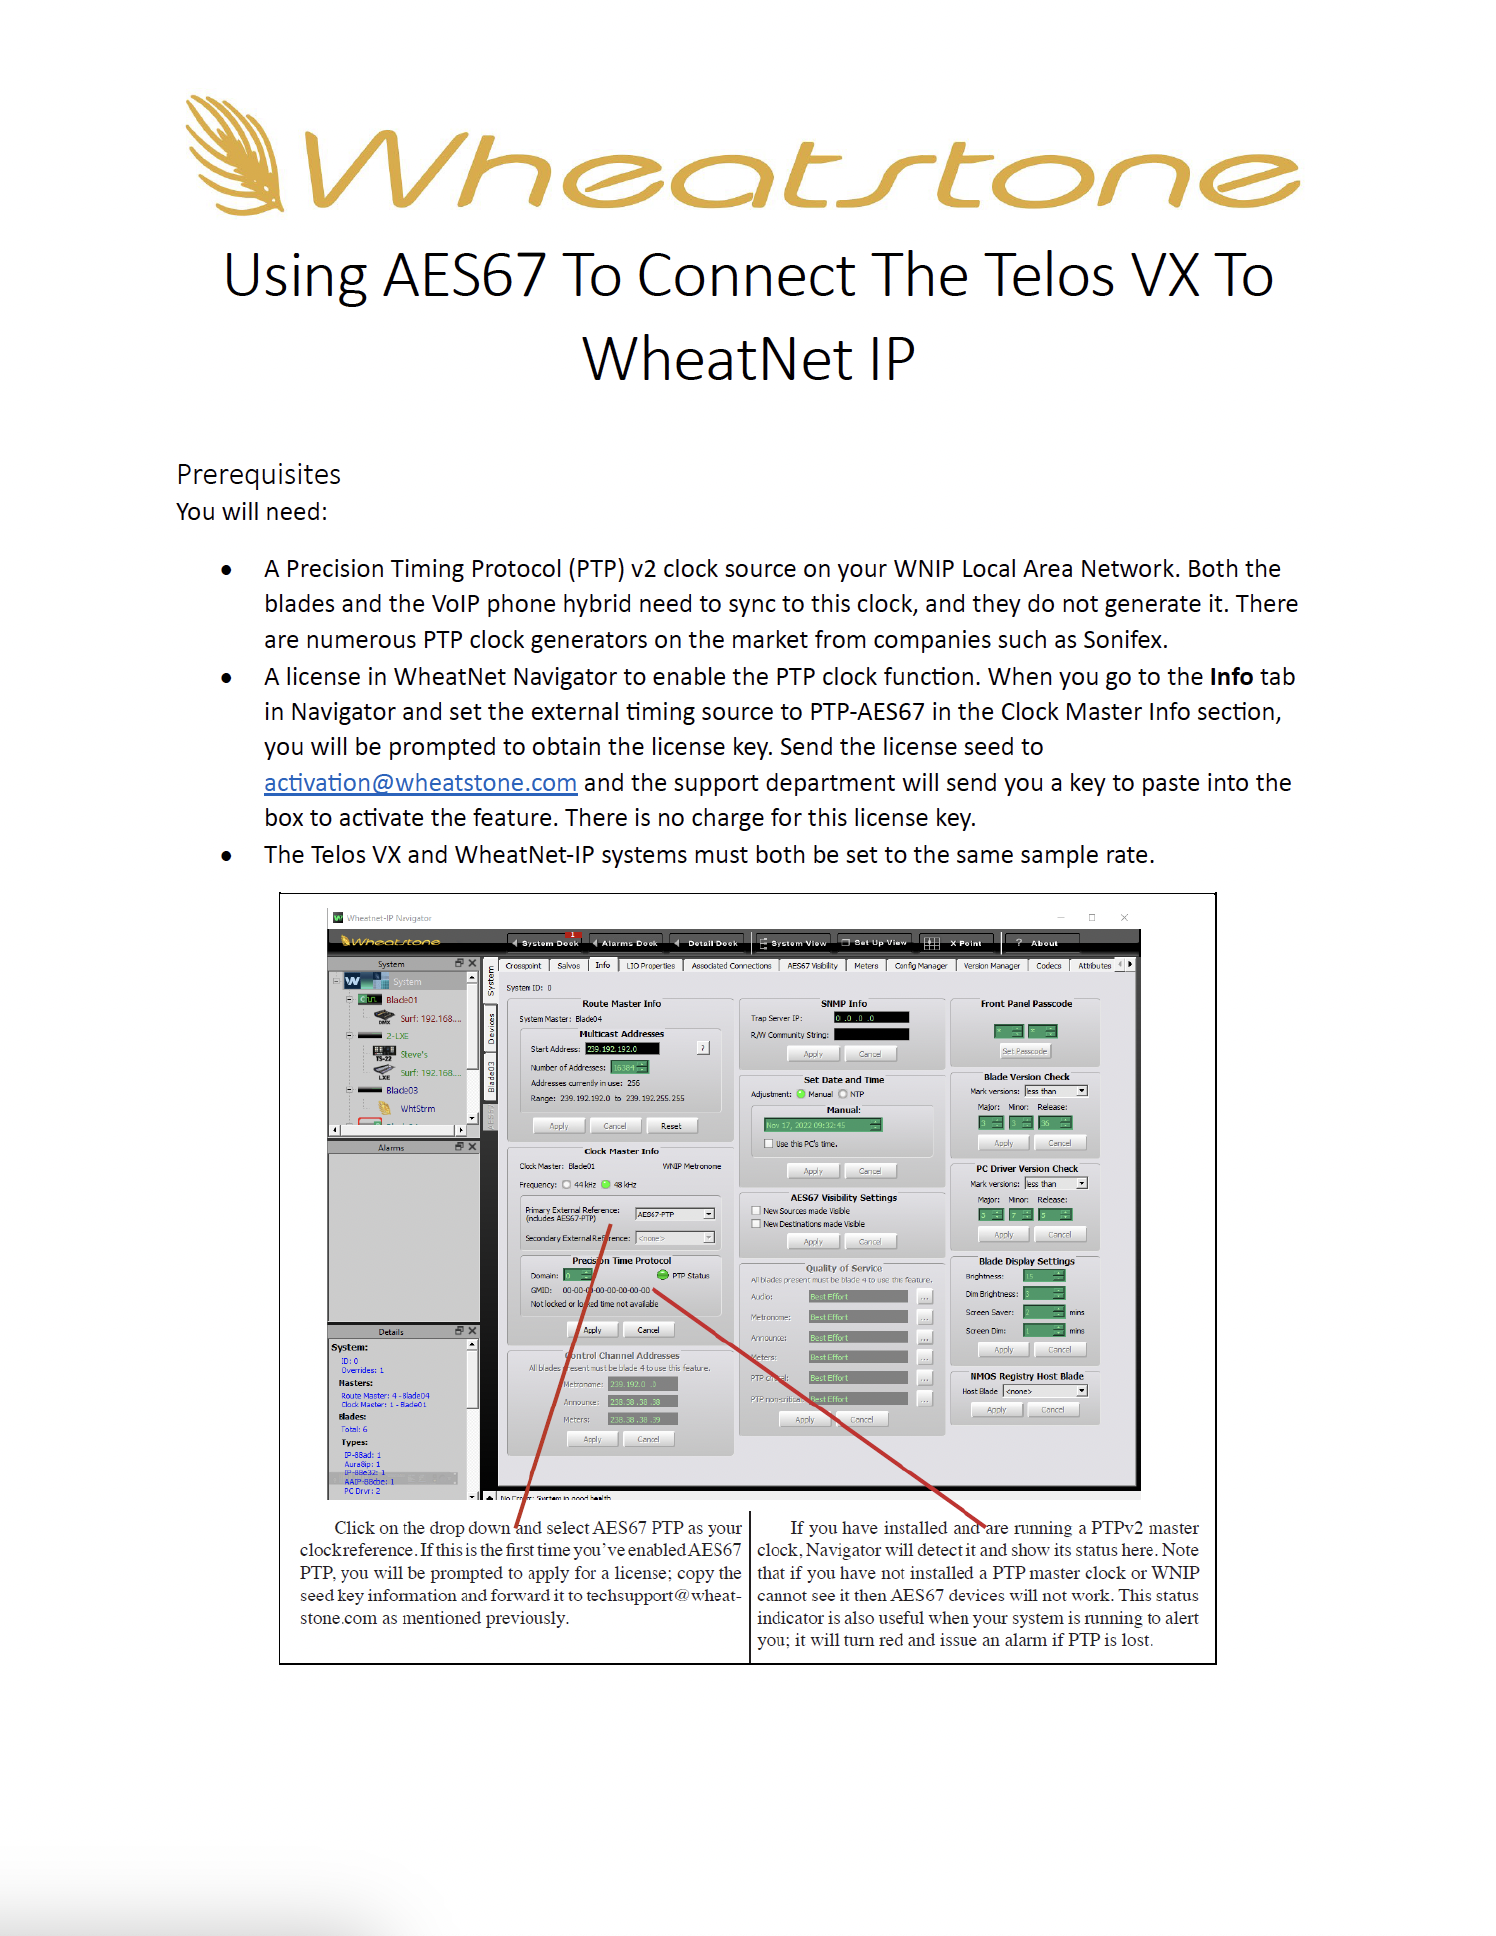 Using AES67 To Connect The Telos VX To WheatNet IP